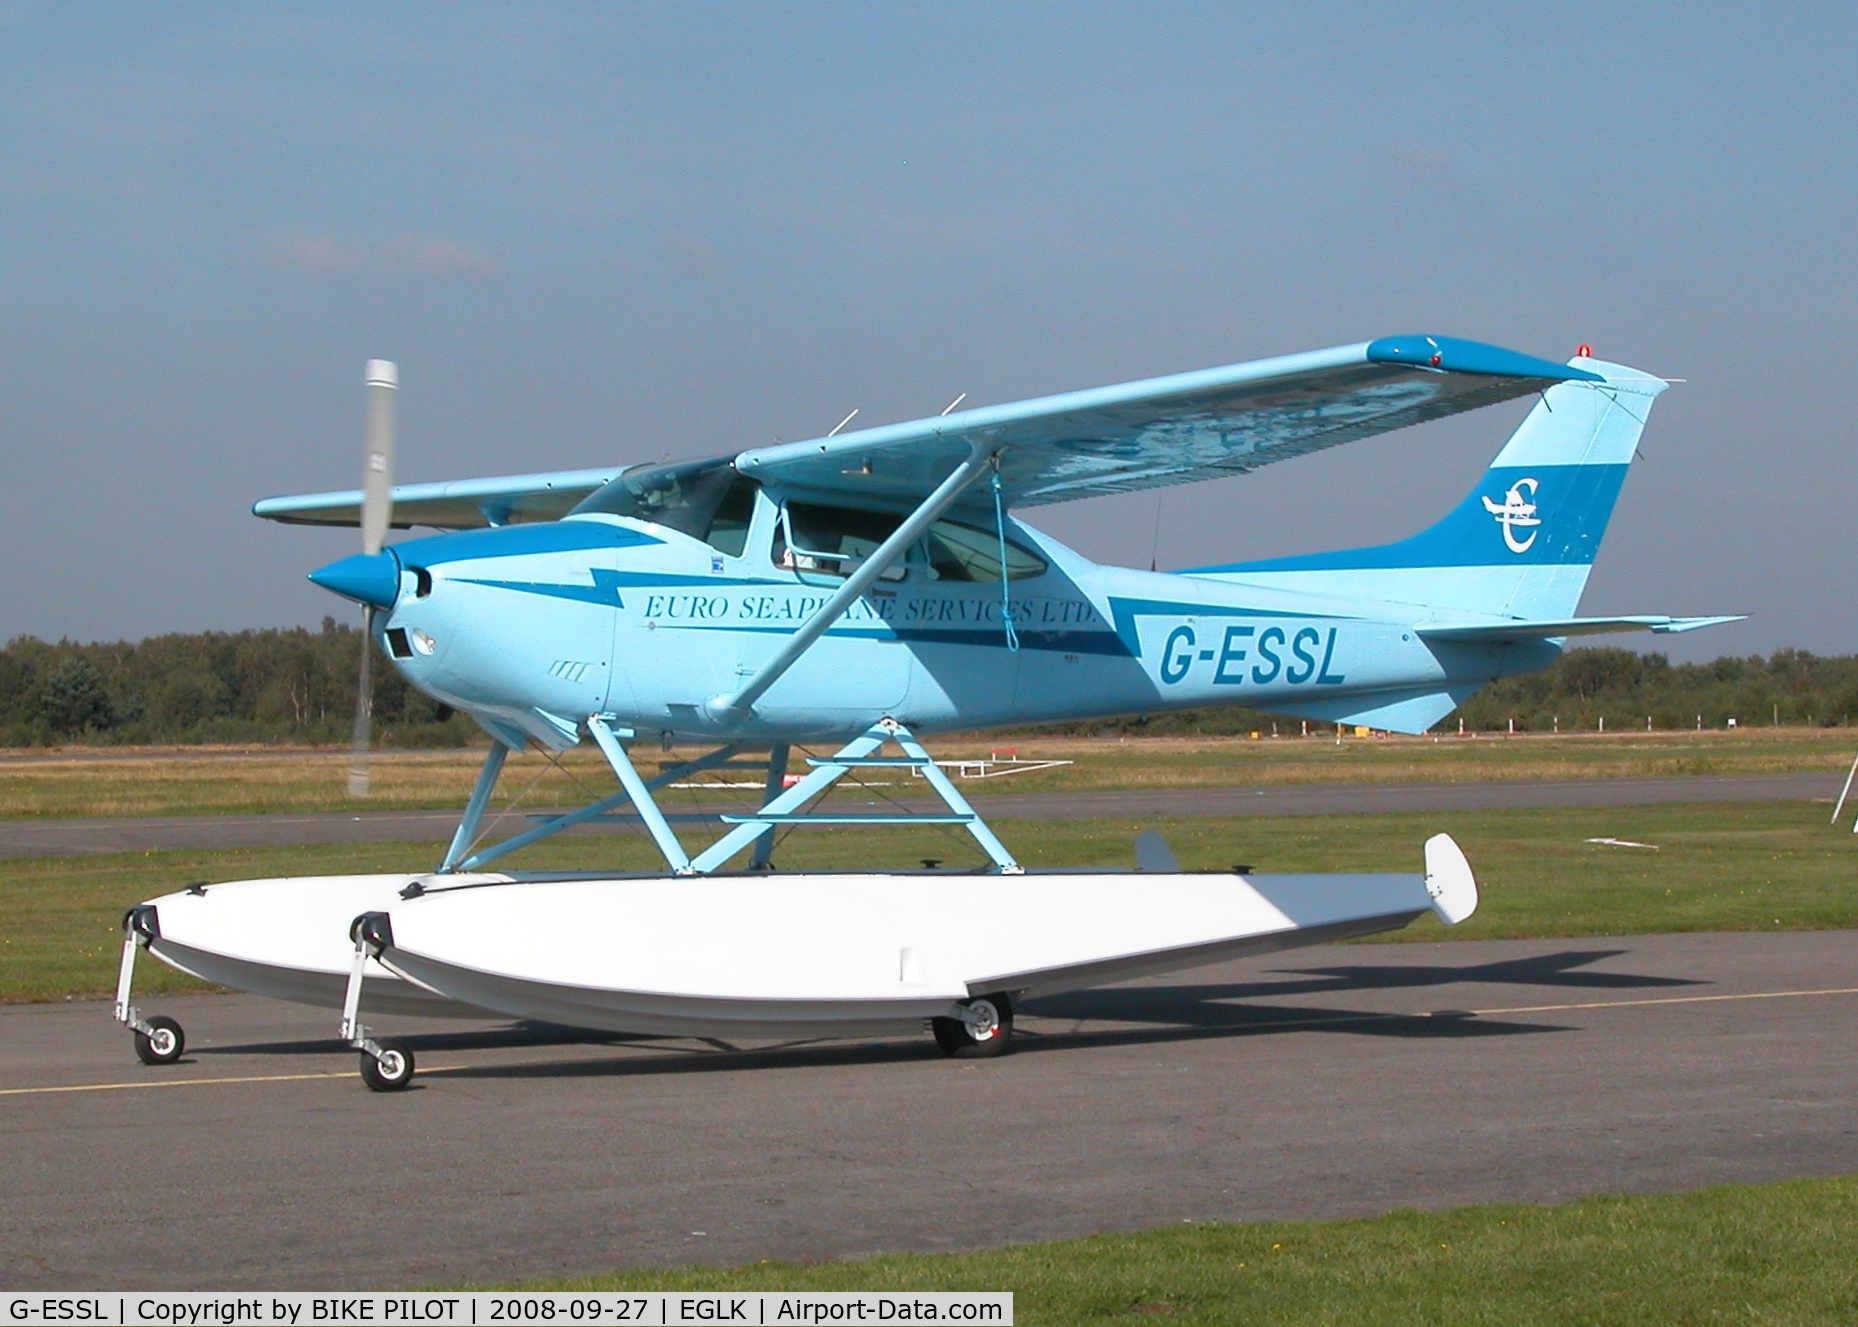 G-ESSL, 1981 Cessna 182R Skylane C/N 182-67947, One of the few float planes in the UK just re-fuelled after a flight down to the Solent